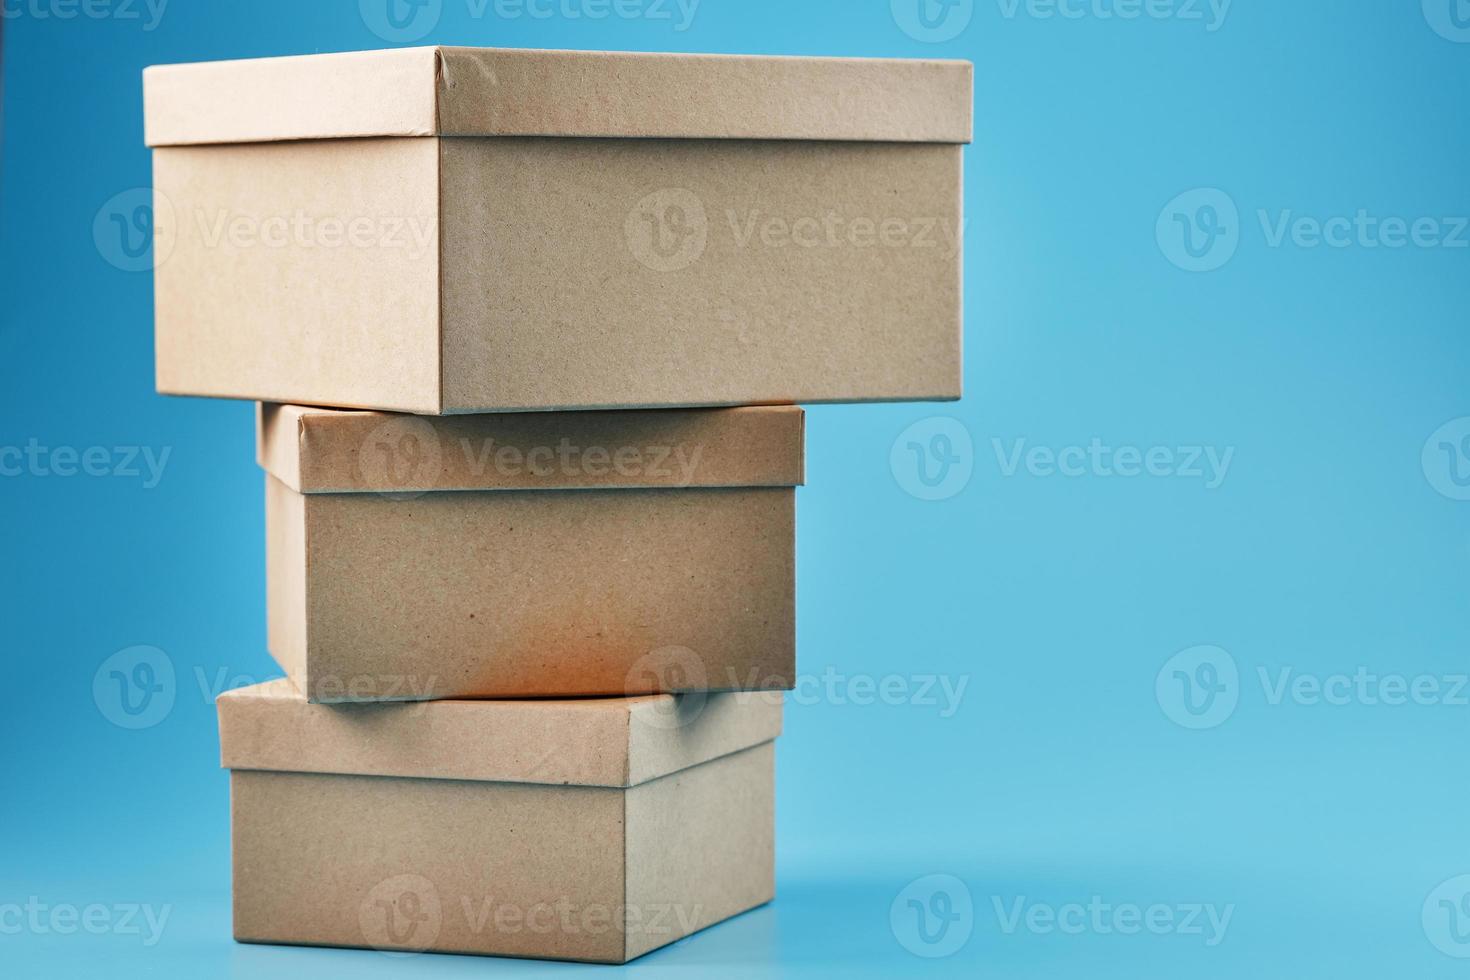 Cardboard boxes in the shape of a pyramid on a blue background. photo